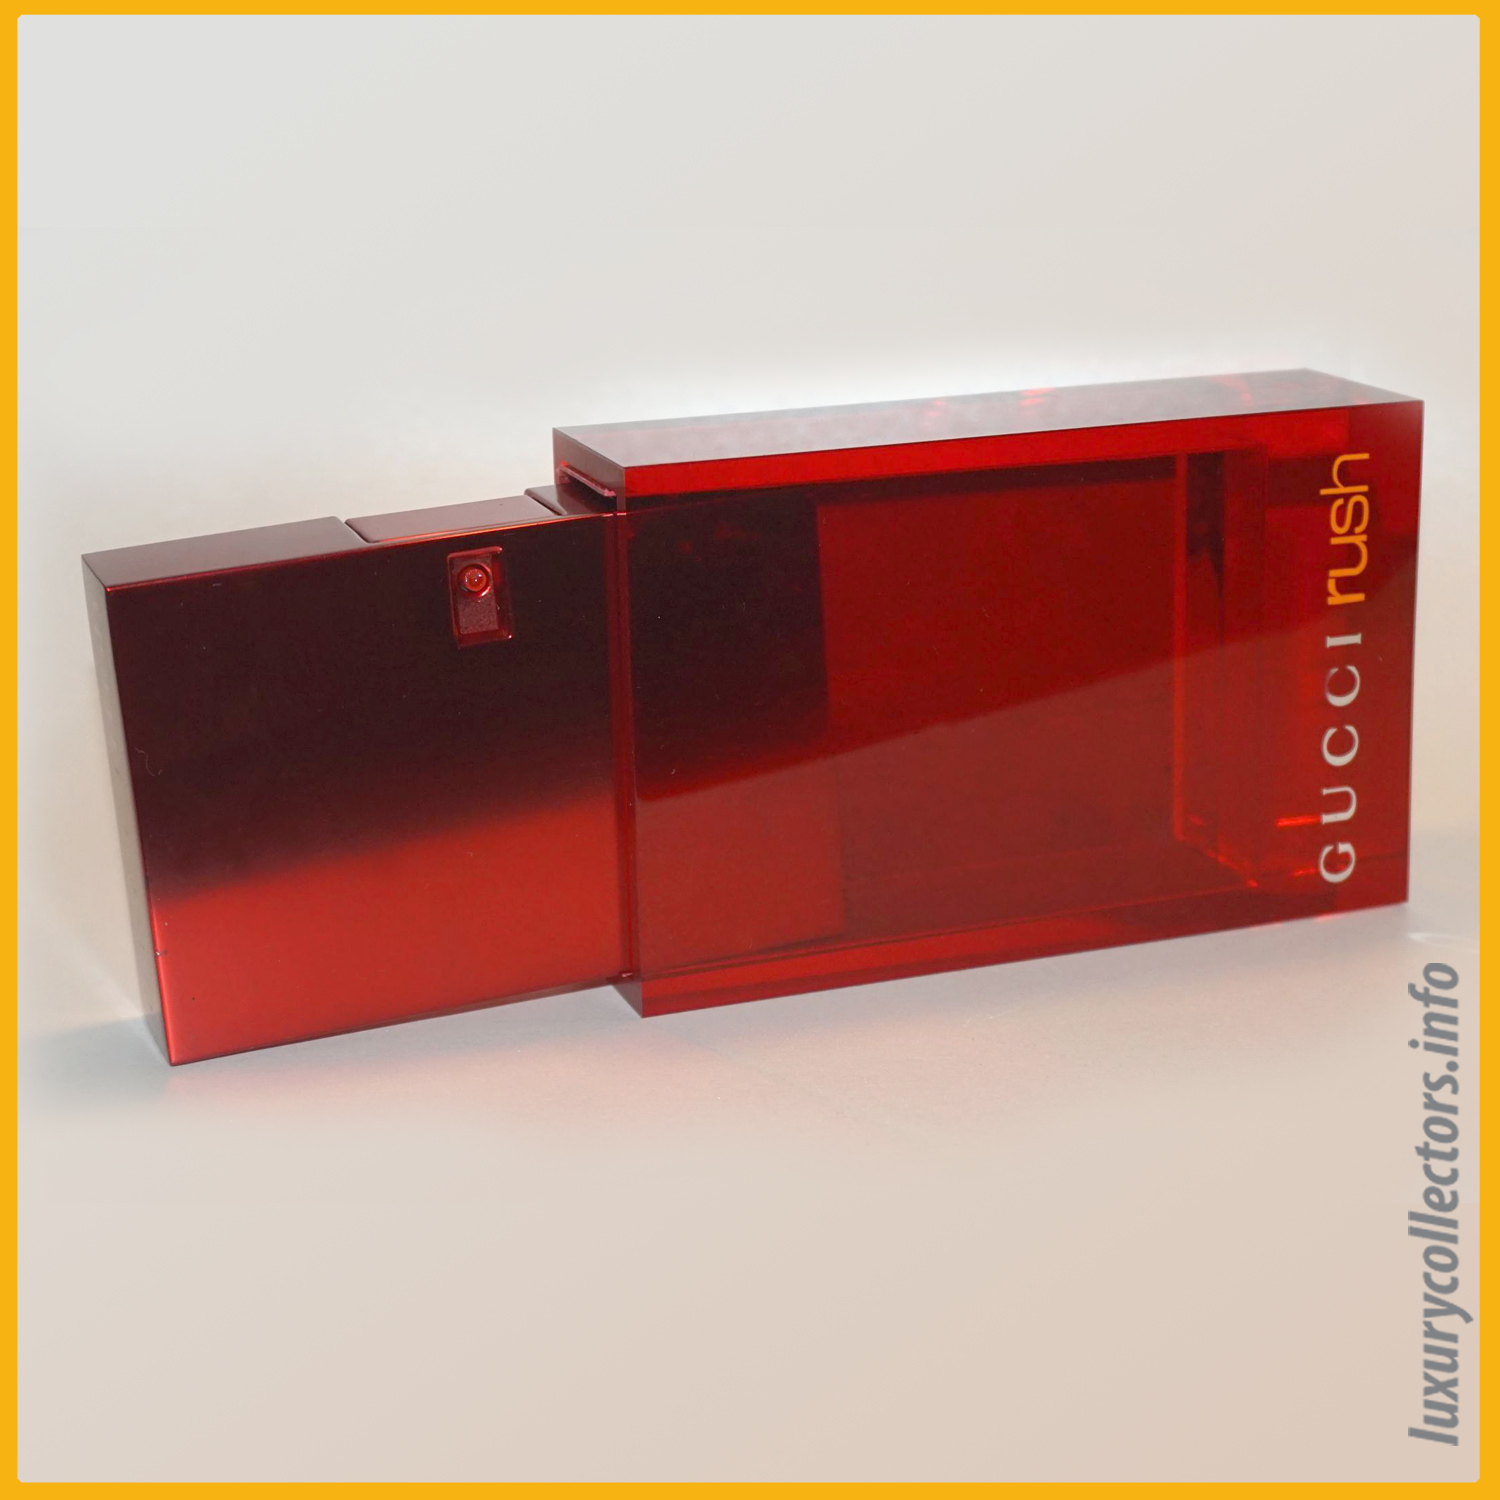 Gucci Tom Ford Italy Rush Perfume Bottle Limited Edition Millennium Parfum 1999 2000 Metal Container Acrylic Sleeve Slide Out